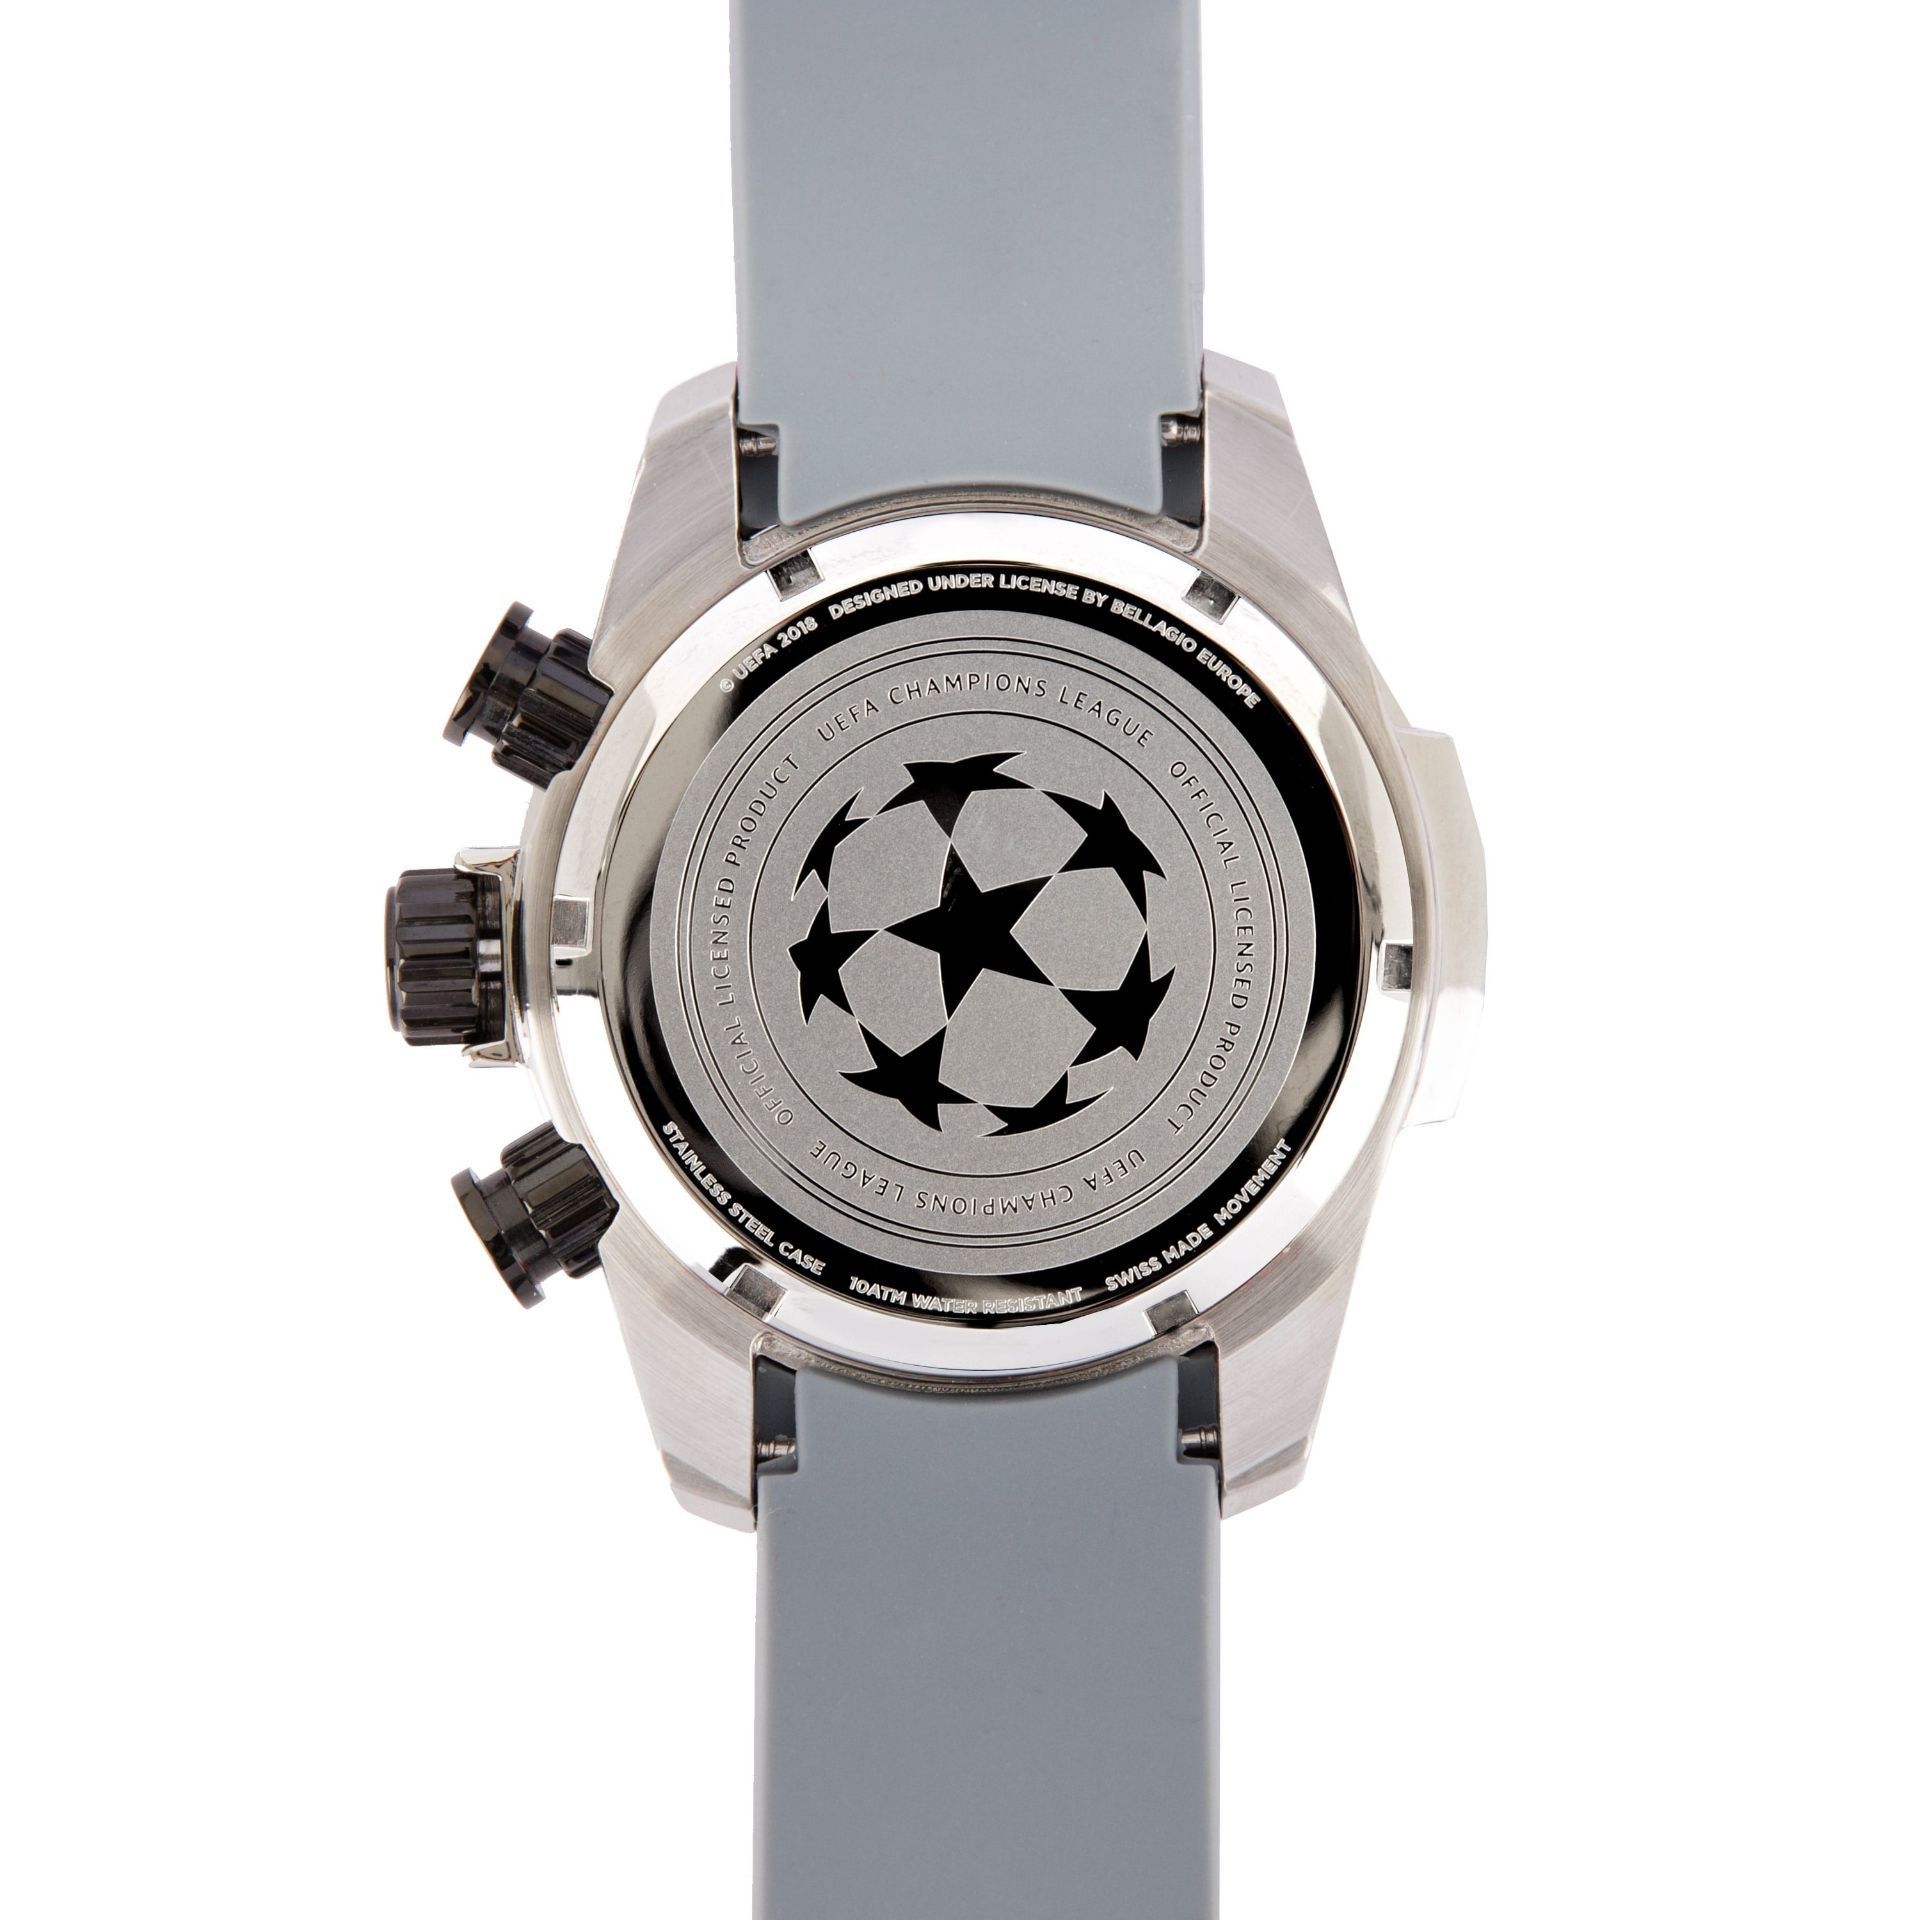 BRAND NEW OFFICIAL UEFA CHAMPIONS LEAGUE 45 MINUTE COUNTDOWN WATCH CL45-STB-GRBLP, RRP £225 - Image 3 of 5